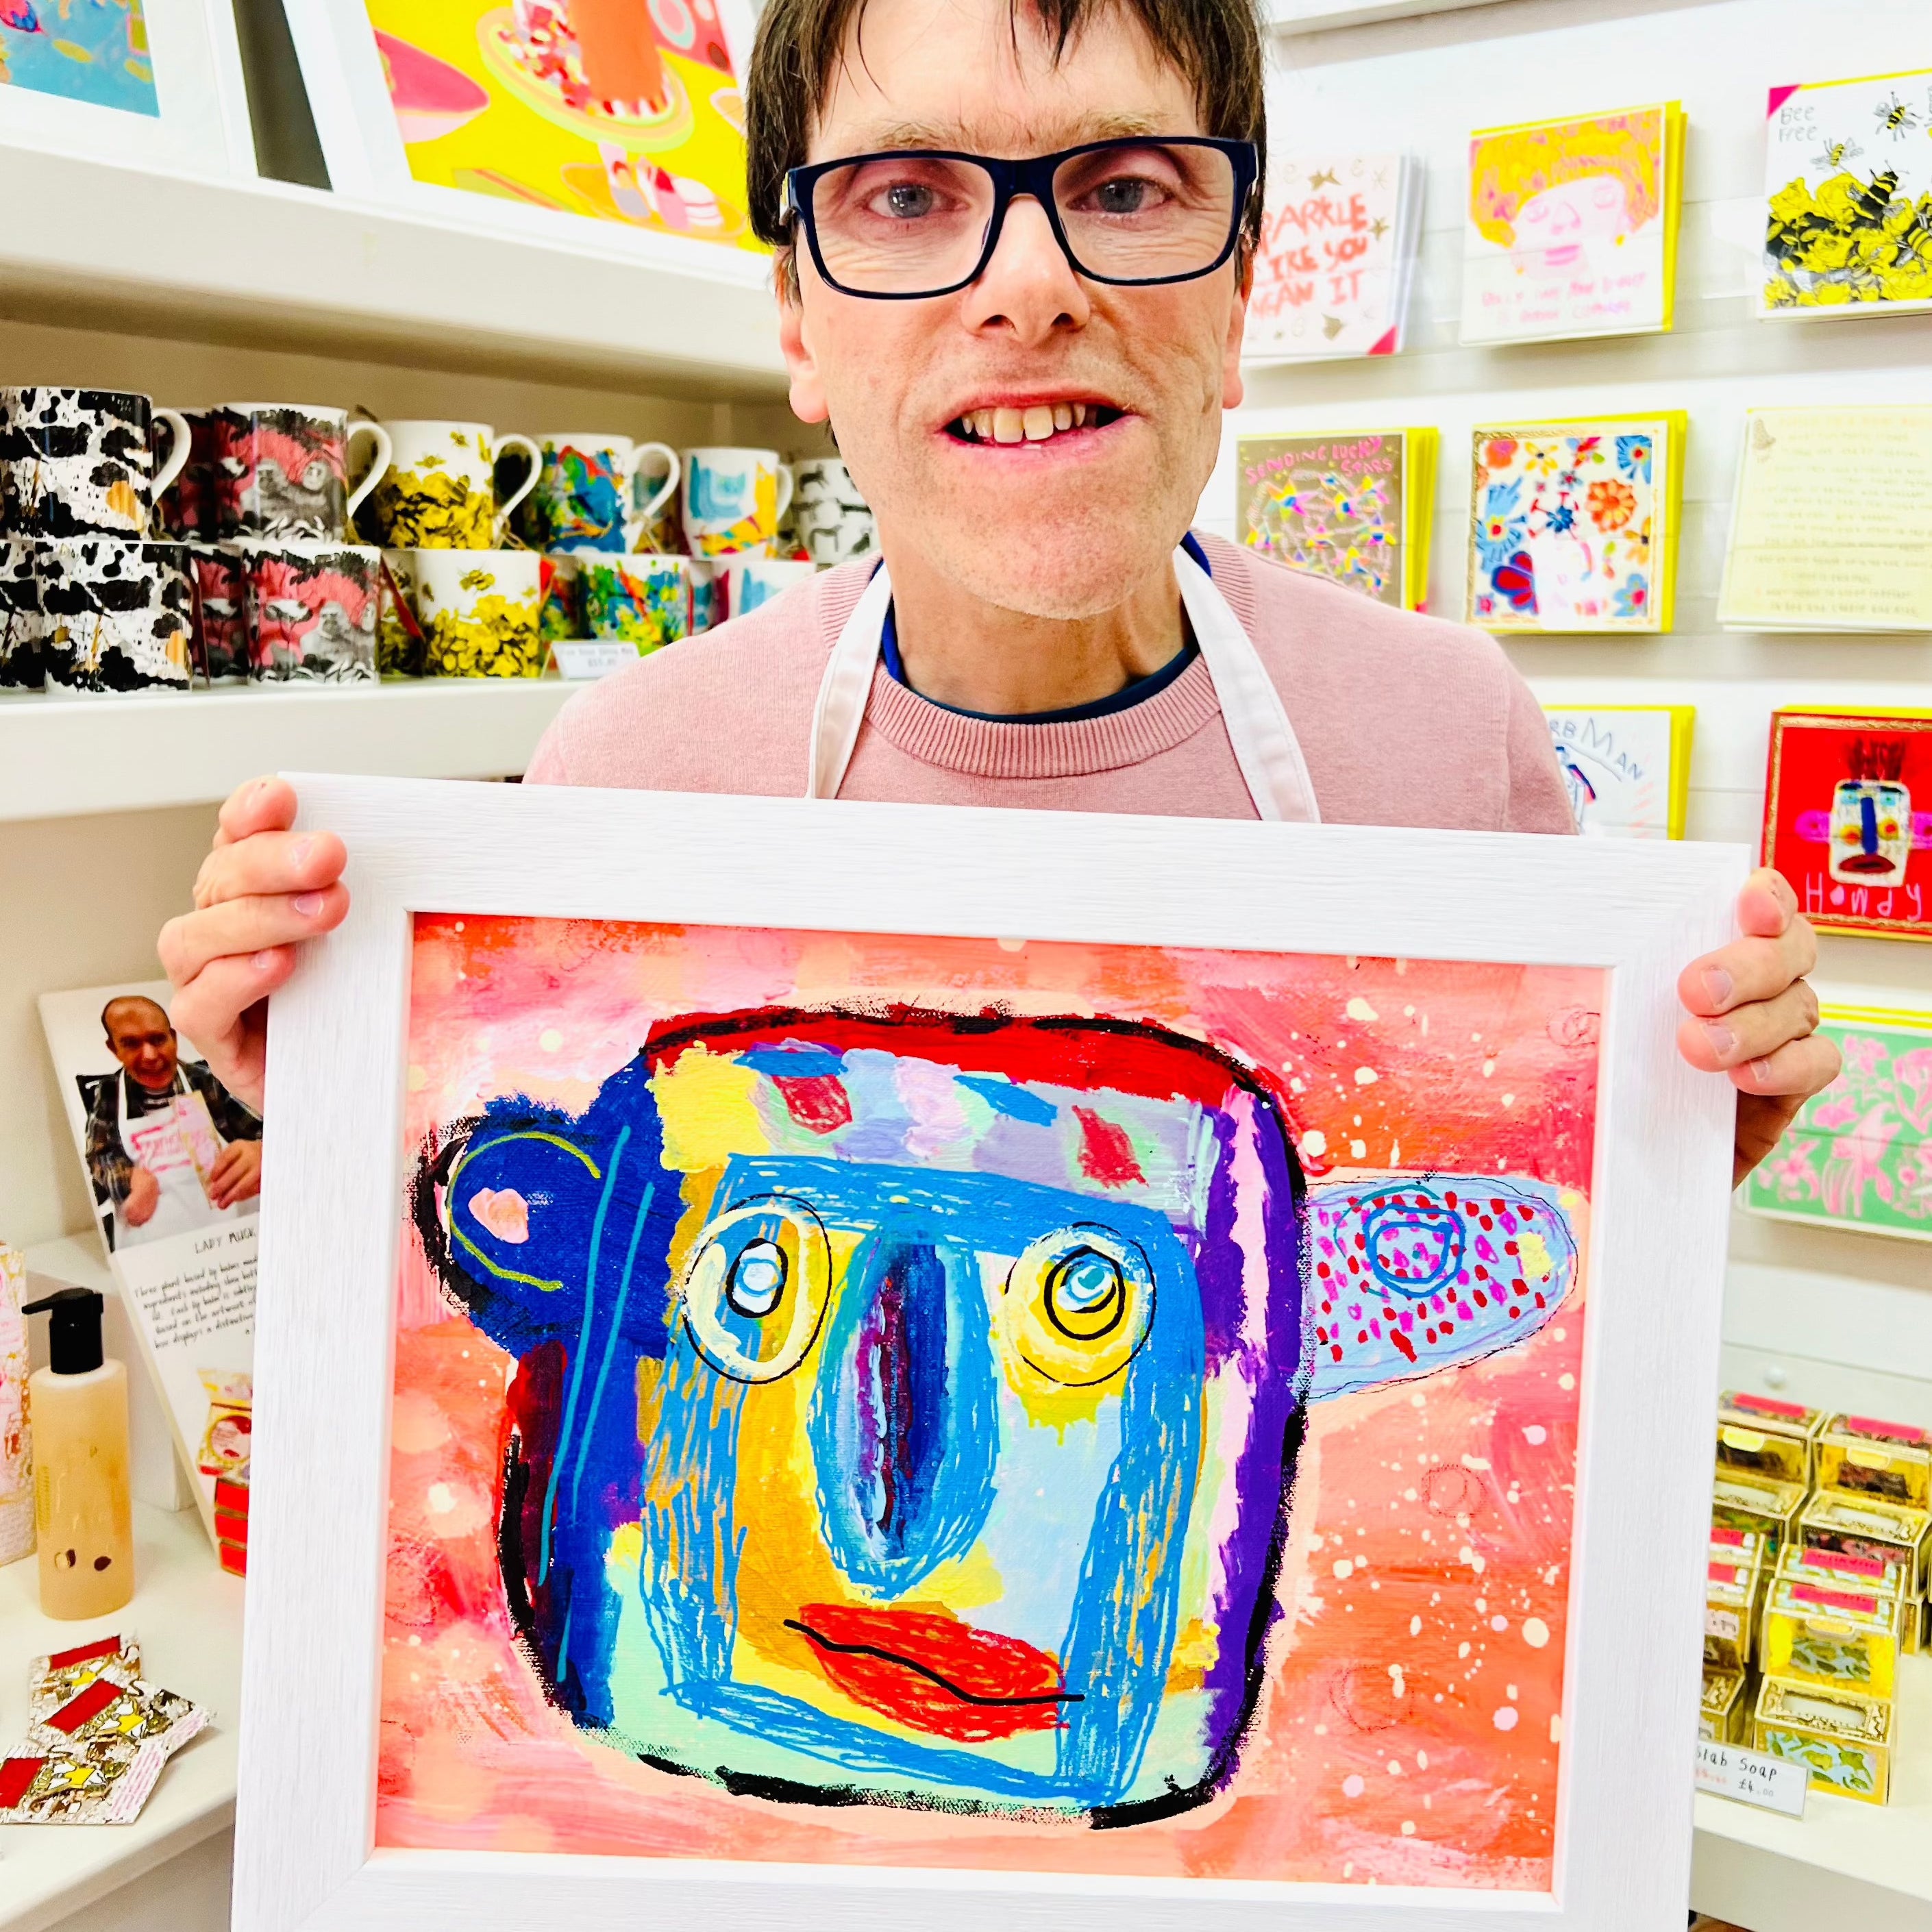 Male artist holding Framed abstract painting of a man with a blue face and large ears and nose